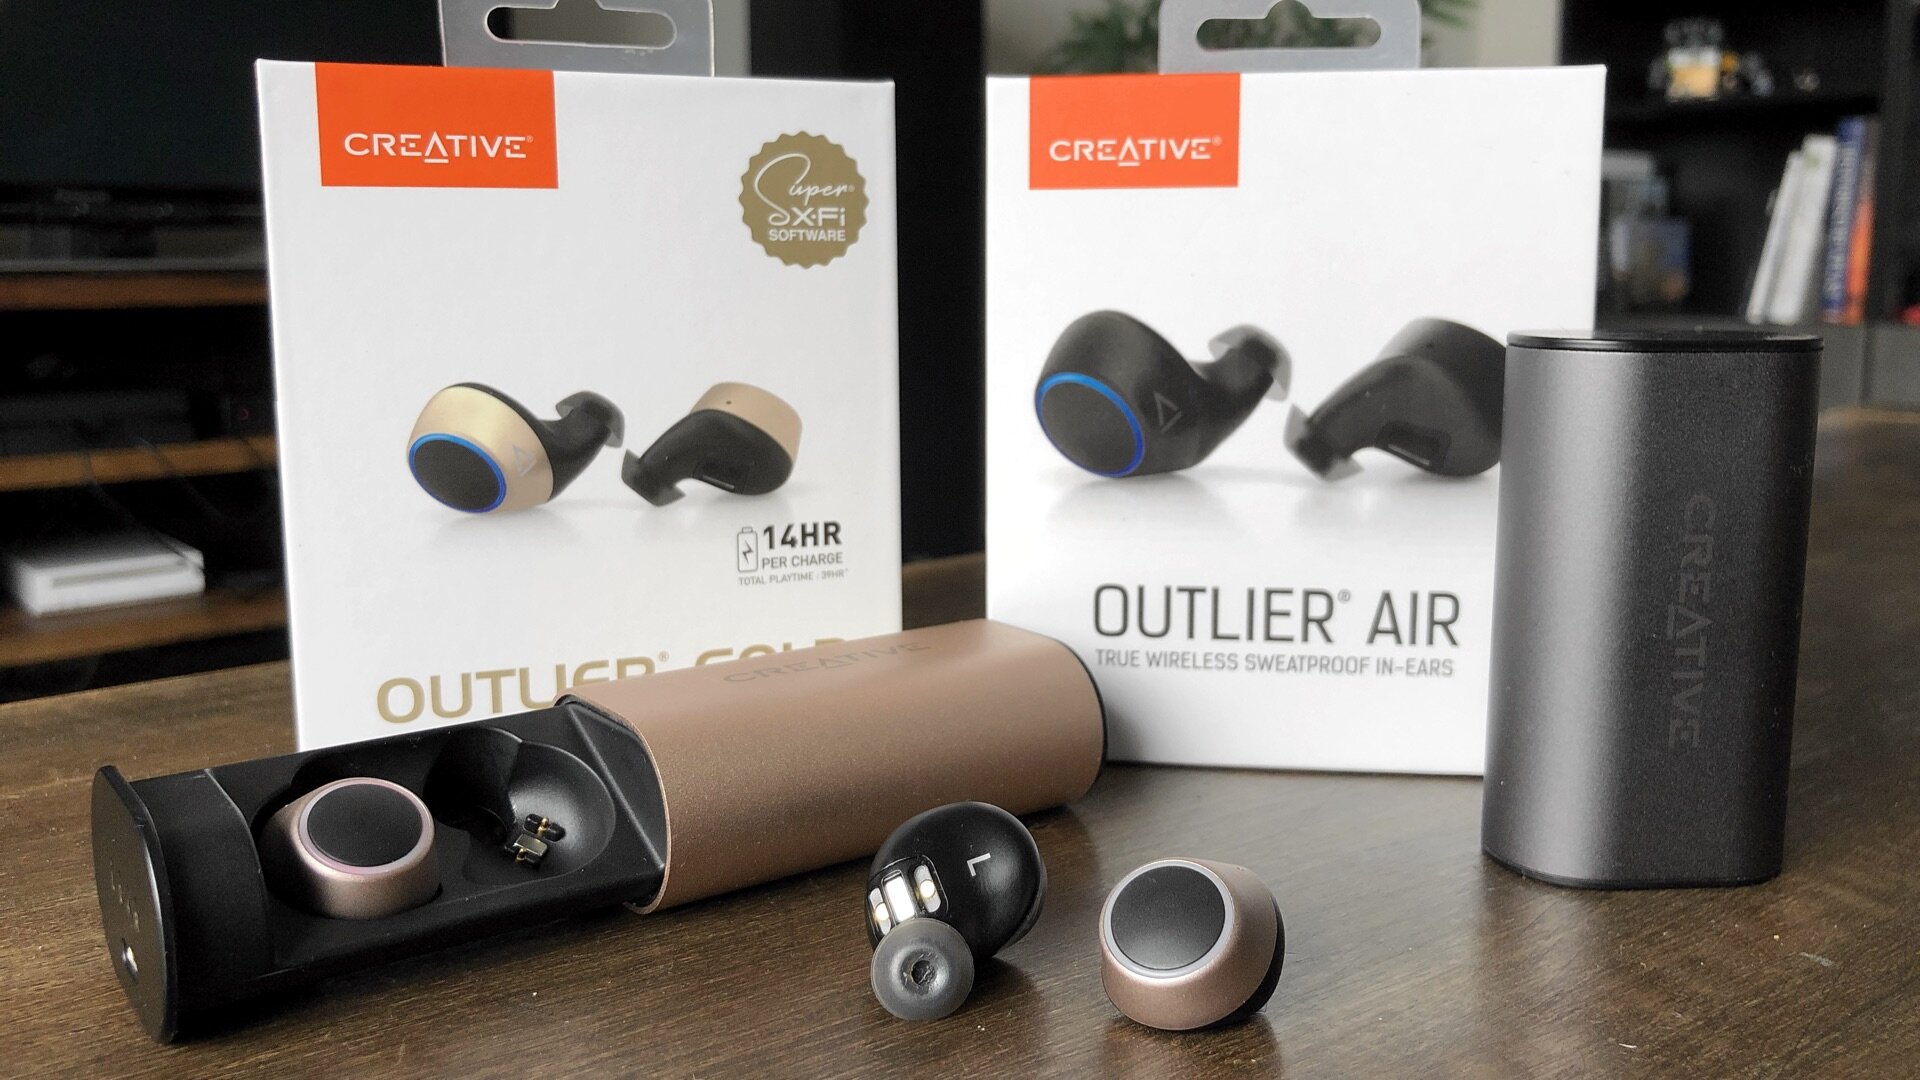 Creative Outlier Air True Wireless Sweatproof In-ear Headphones with  30-Hour Battery Life - Creative Labs (United States)